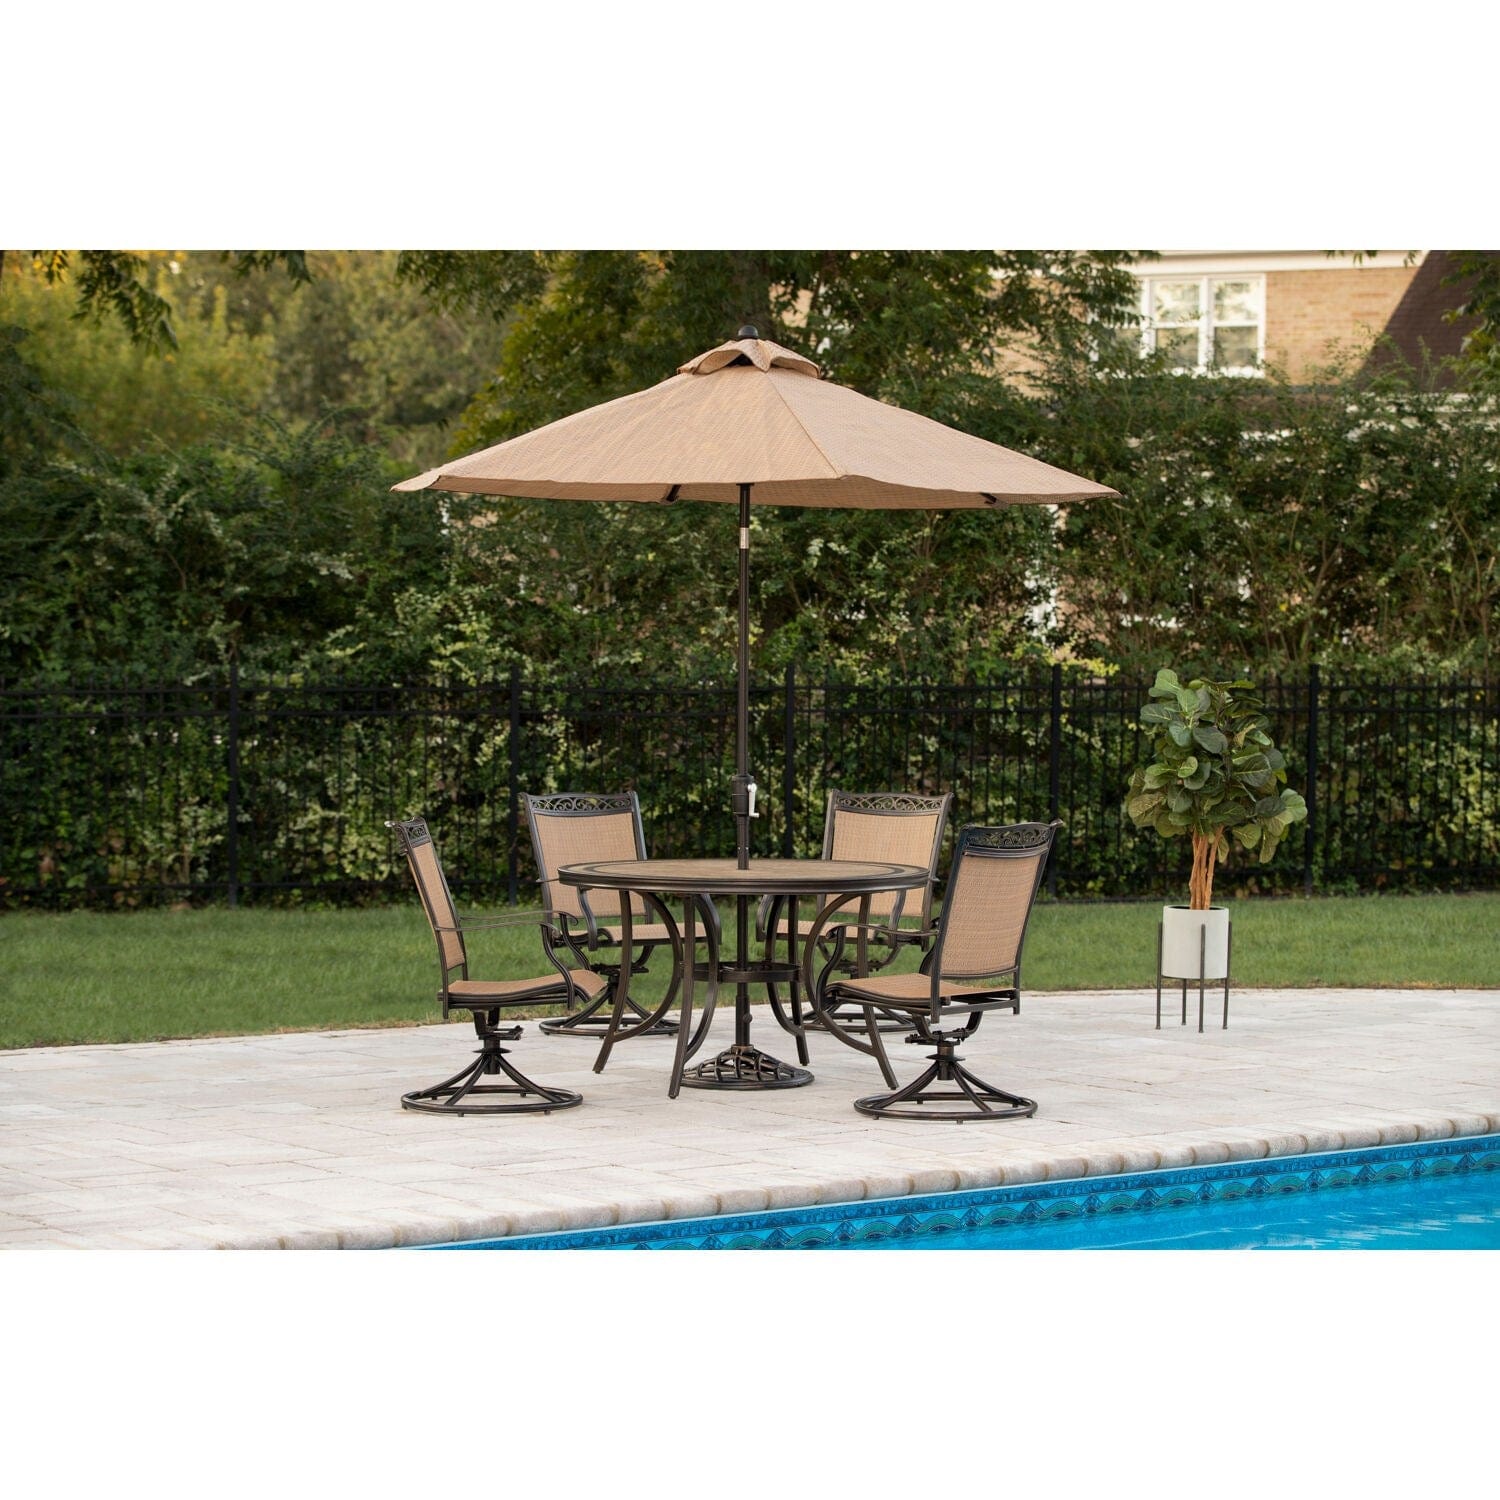 Recreation Outfitters Outdoor Dining Set Hanover Fontana 5 Piece Outdoor Dining Set with Four Sling Swivel Rockers | a 51 In. Tile-top Dining Table and a 9 Ft. Table Umbrella | FNTDN5PCSWTN-SU